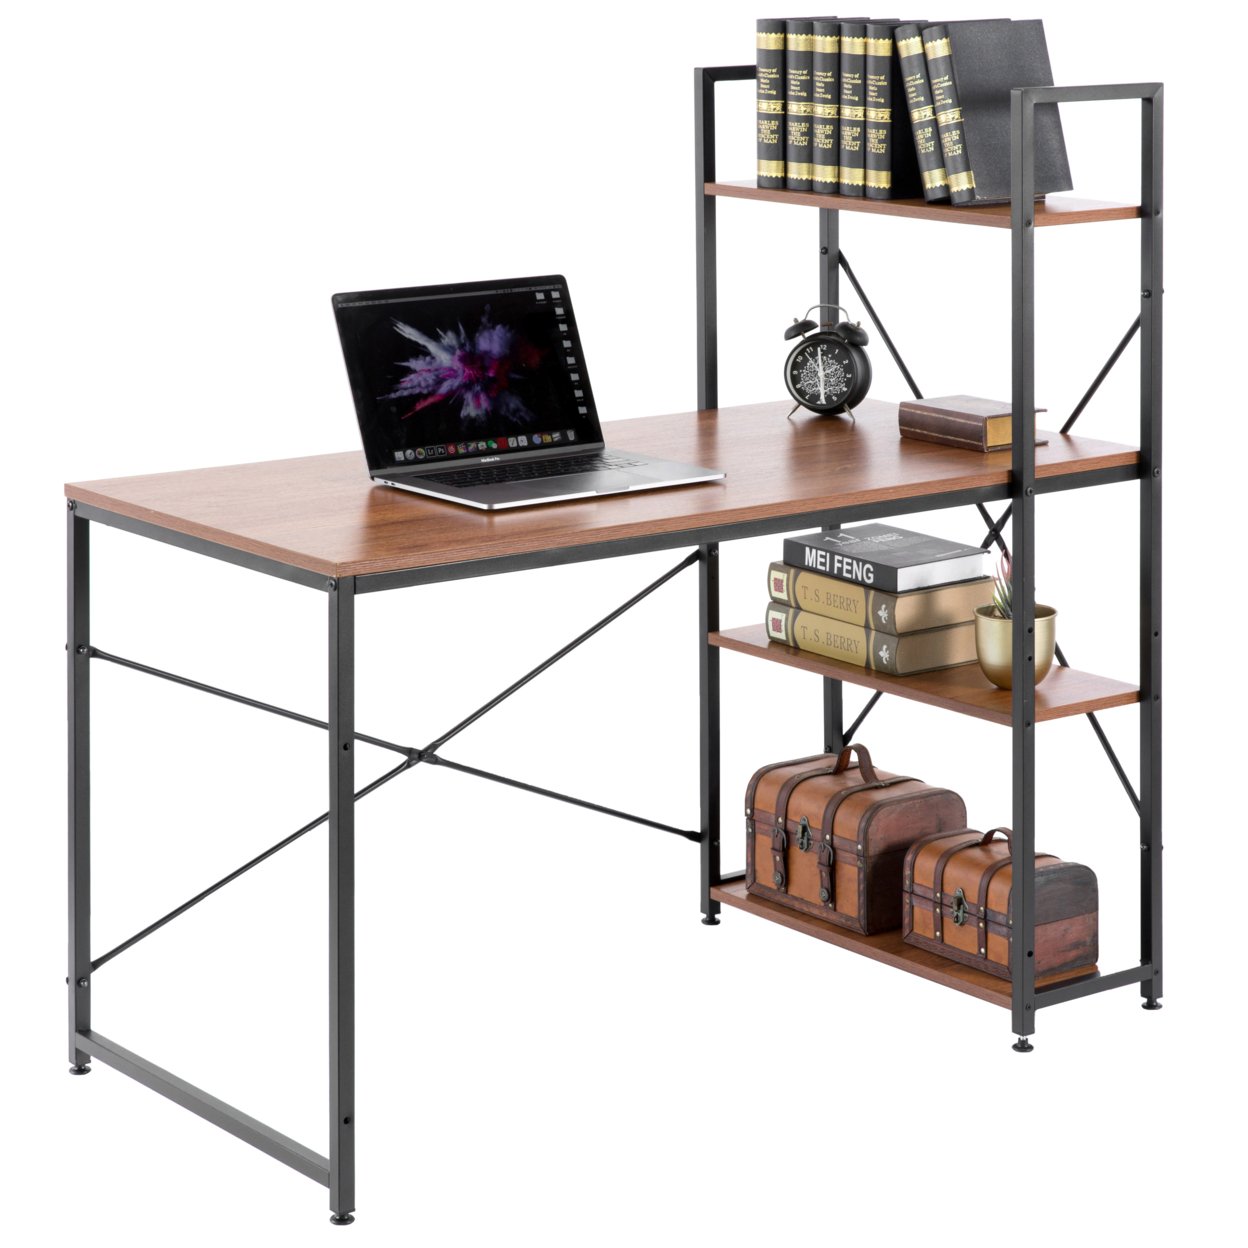 Wood And Metal Industrial Home Office Computer Desk With Bookshelves - Natural